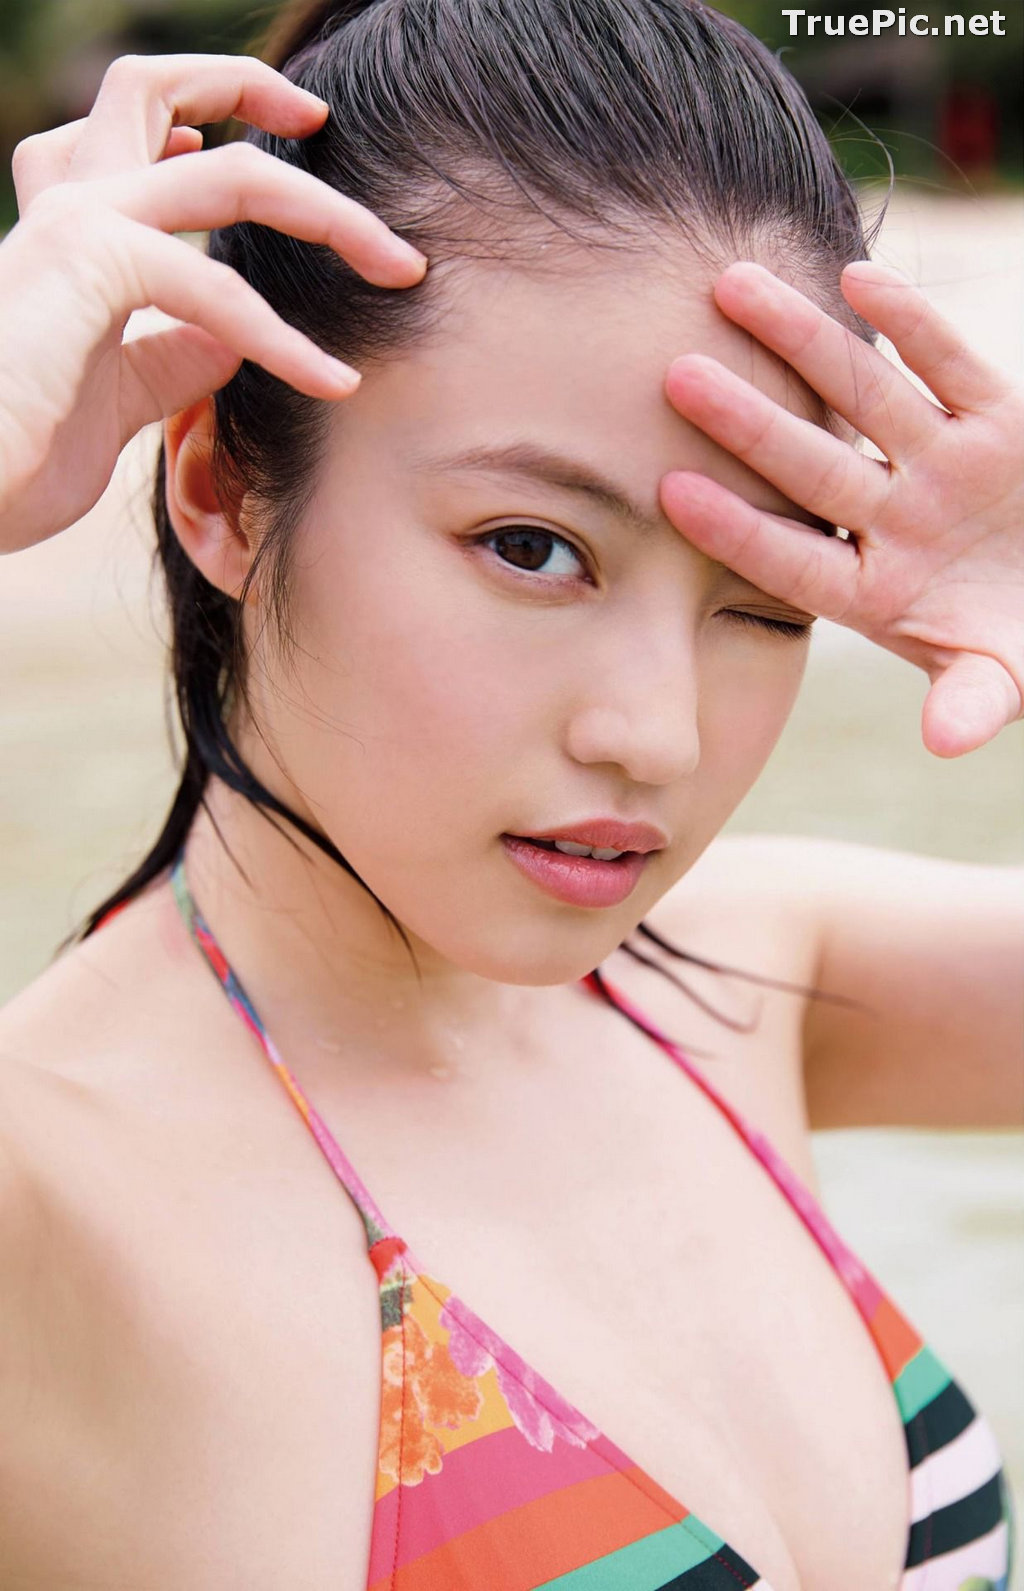 Image Japanese Actress and Model - Mio Imada (今田美櫻) - Sexy Picture Collection 2020 - TruePic.net - Picture-118